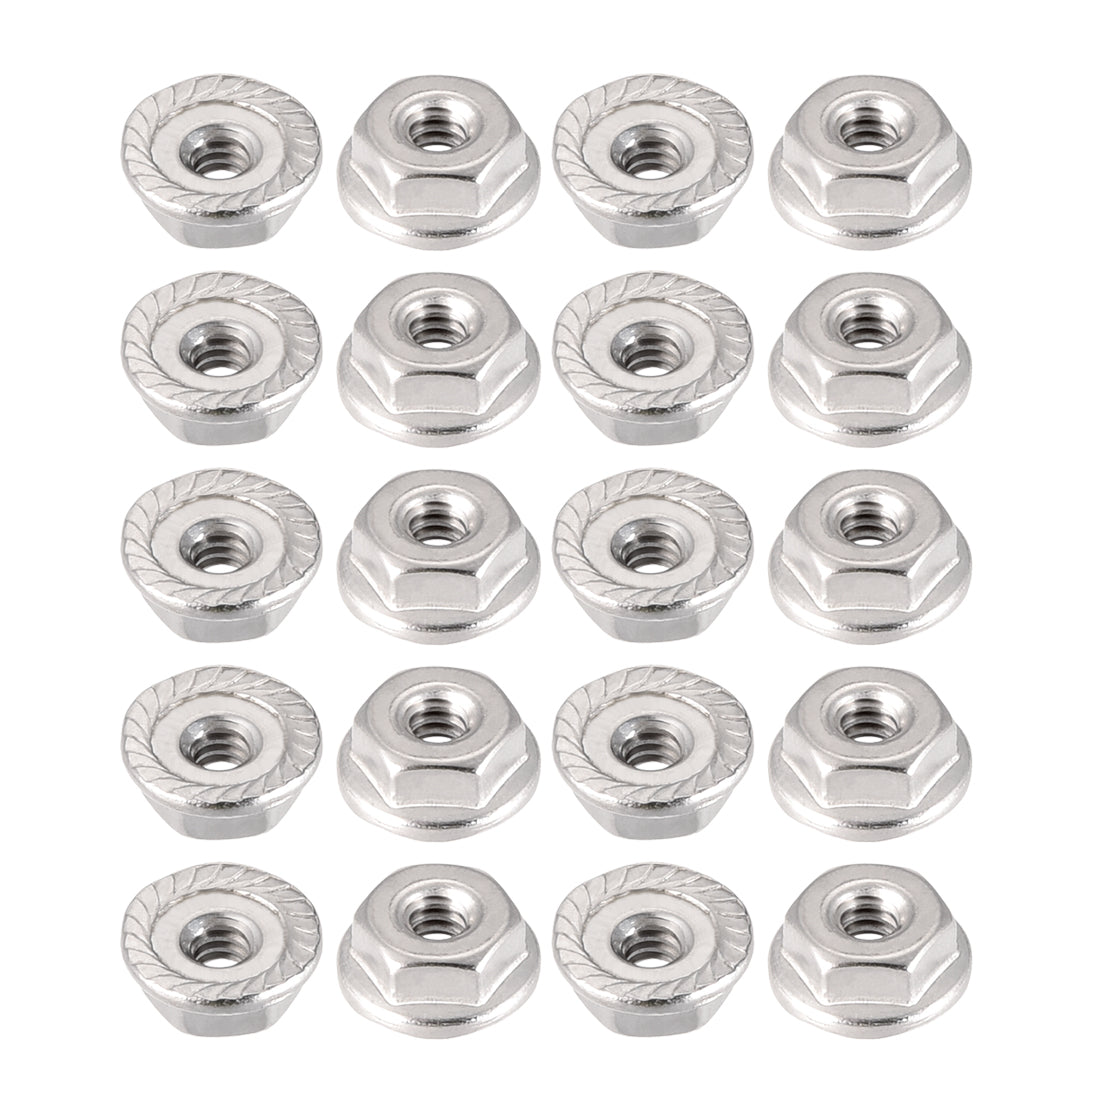 Uxcell Uxcell #6-32 Serrated Flange Hex Lock Nuts, 304 Stainless Steel, 20 Pcs